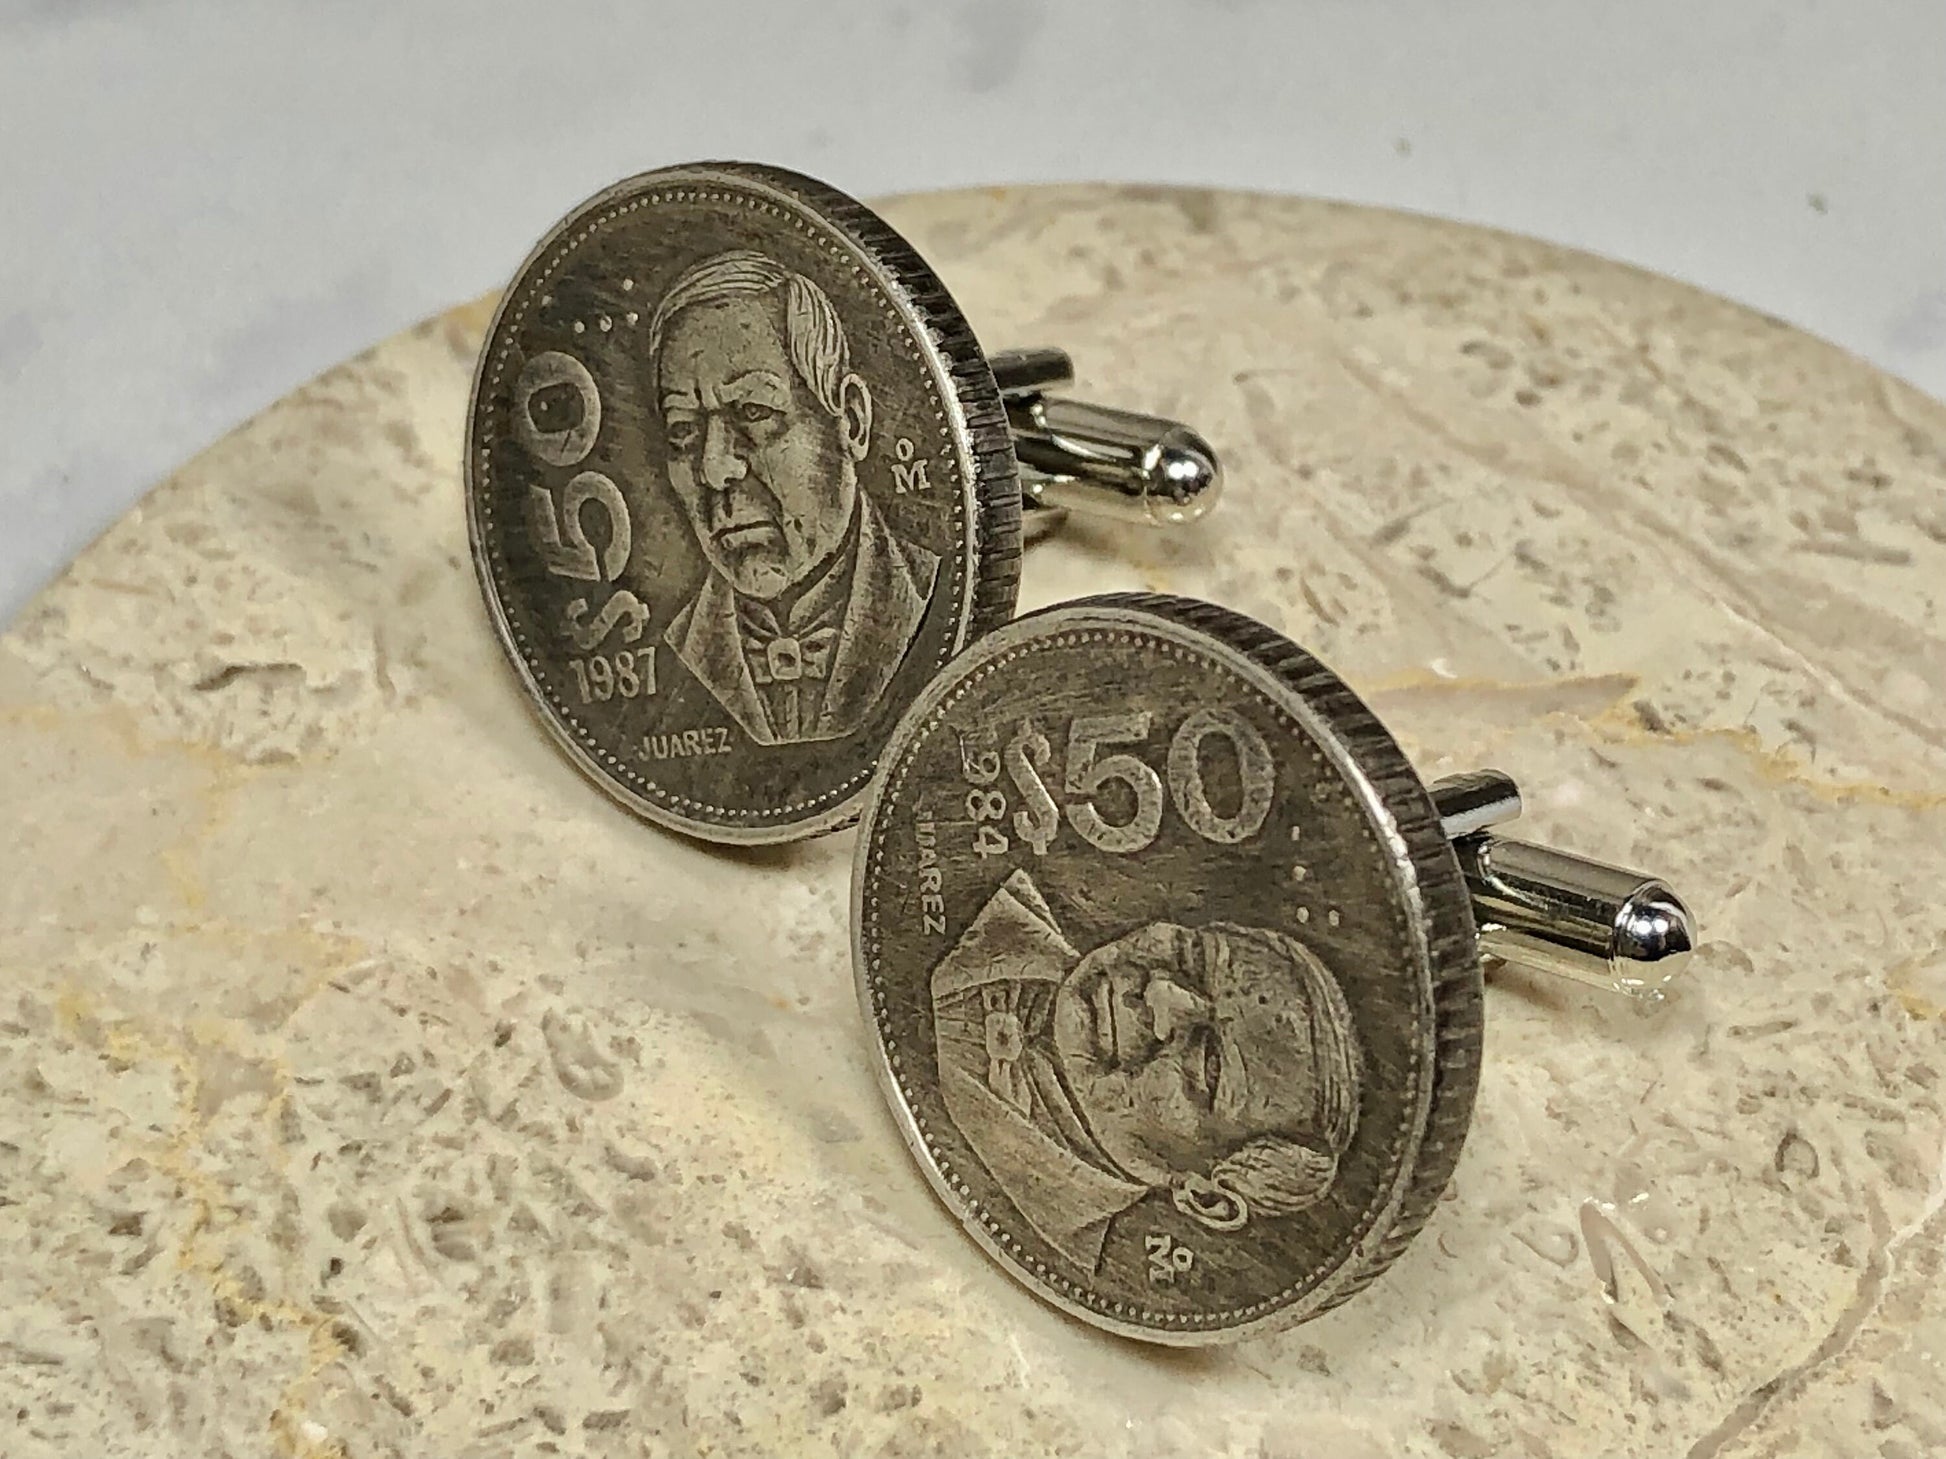 Mexico Coin Cuff Links Mexican 50 Dollar Custom Coins Personal Cufflinks Handmade Jewelry Gift Friend Charm For Him Her World Coin Collector